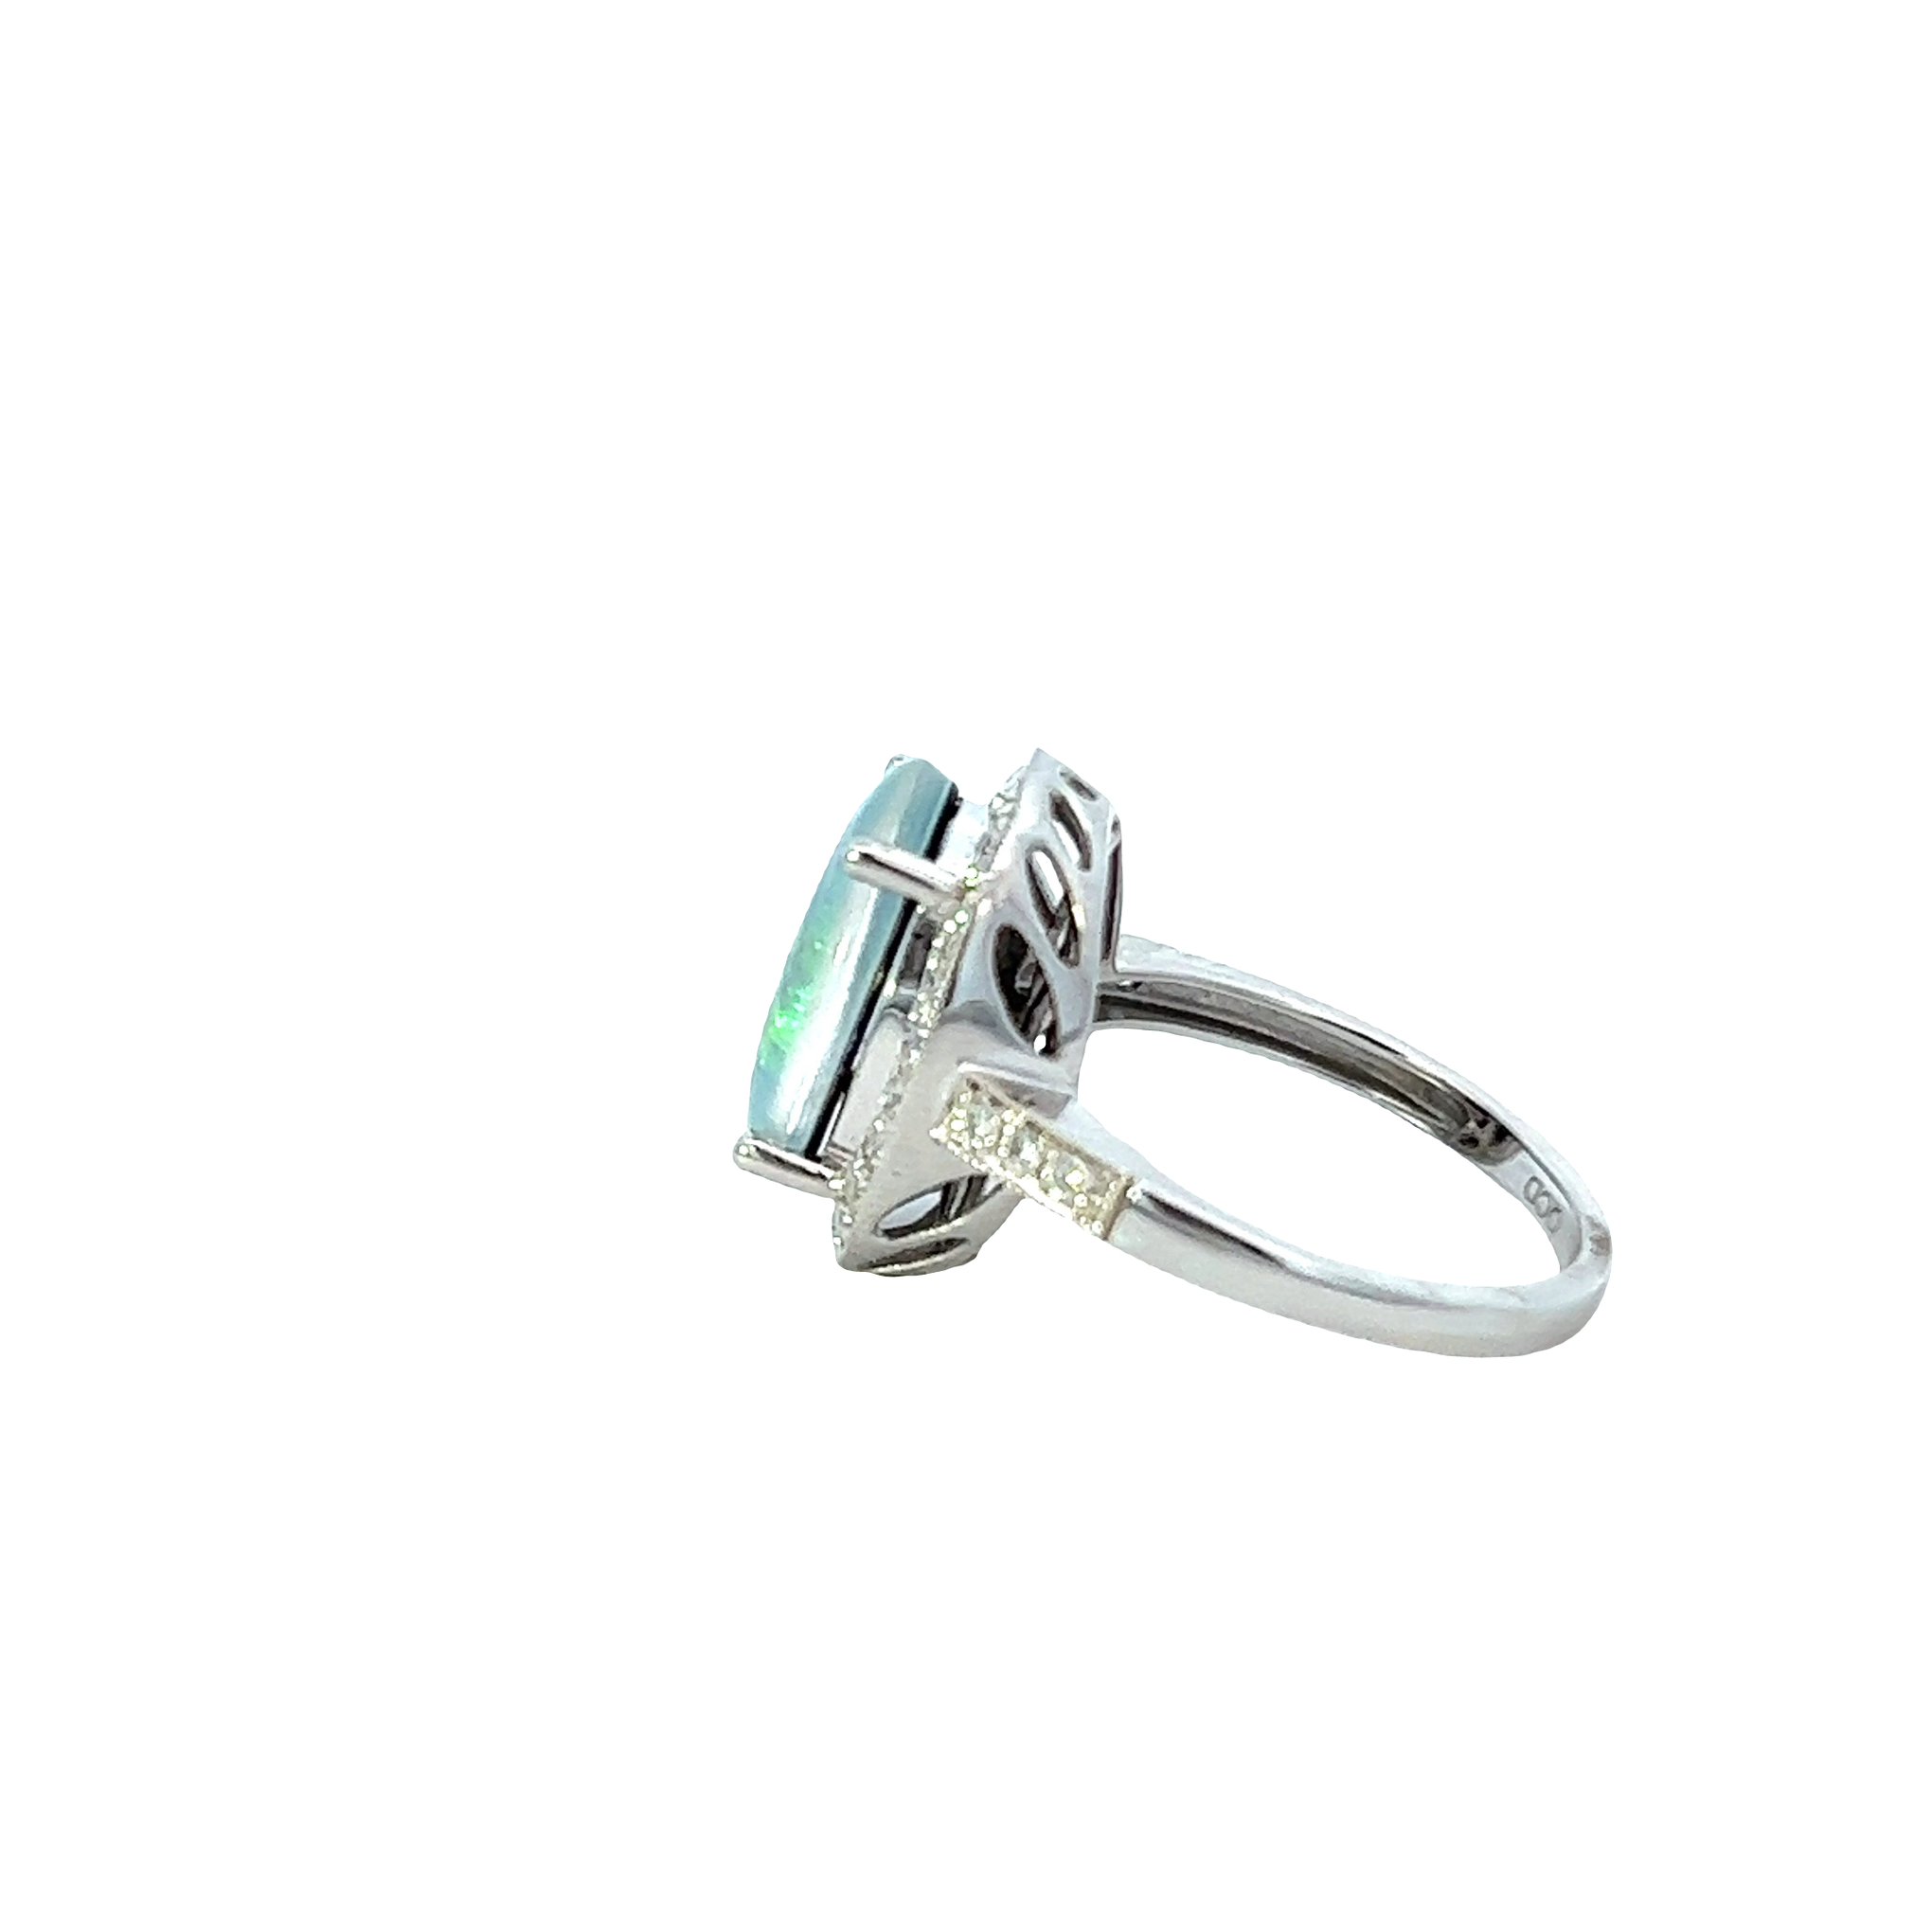 14KT White Gold Opal And Diamond Ring